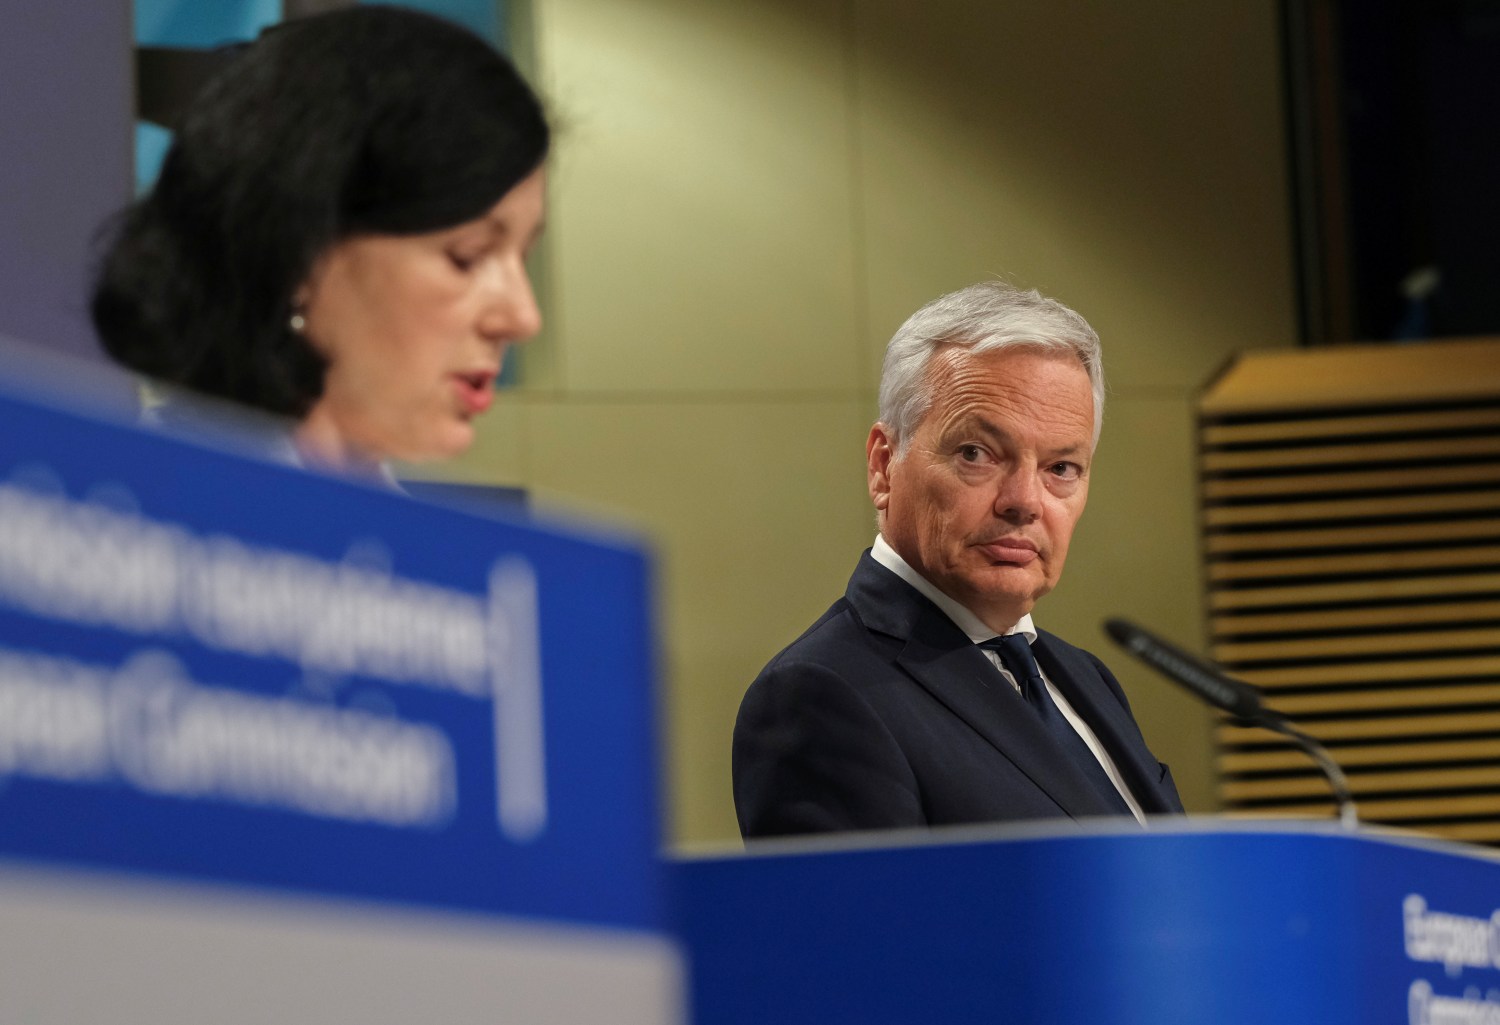 European Commissioner for Values and Transparency Vera Jourova and European Commissioner for Justice Didier Reynders (R) give a news conference on EU rules on data protection (GDPR) and the new EU Strategy on victims' rights, in Brussels, Belgium, June 24, 2020. Olivier Hoslet/Pool via REUTERS